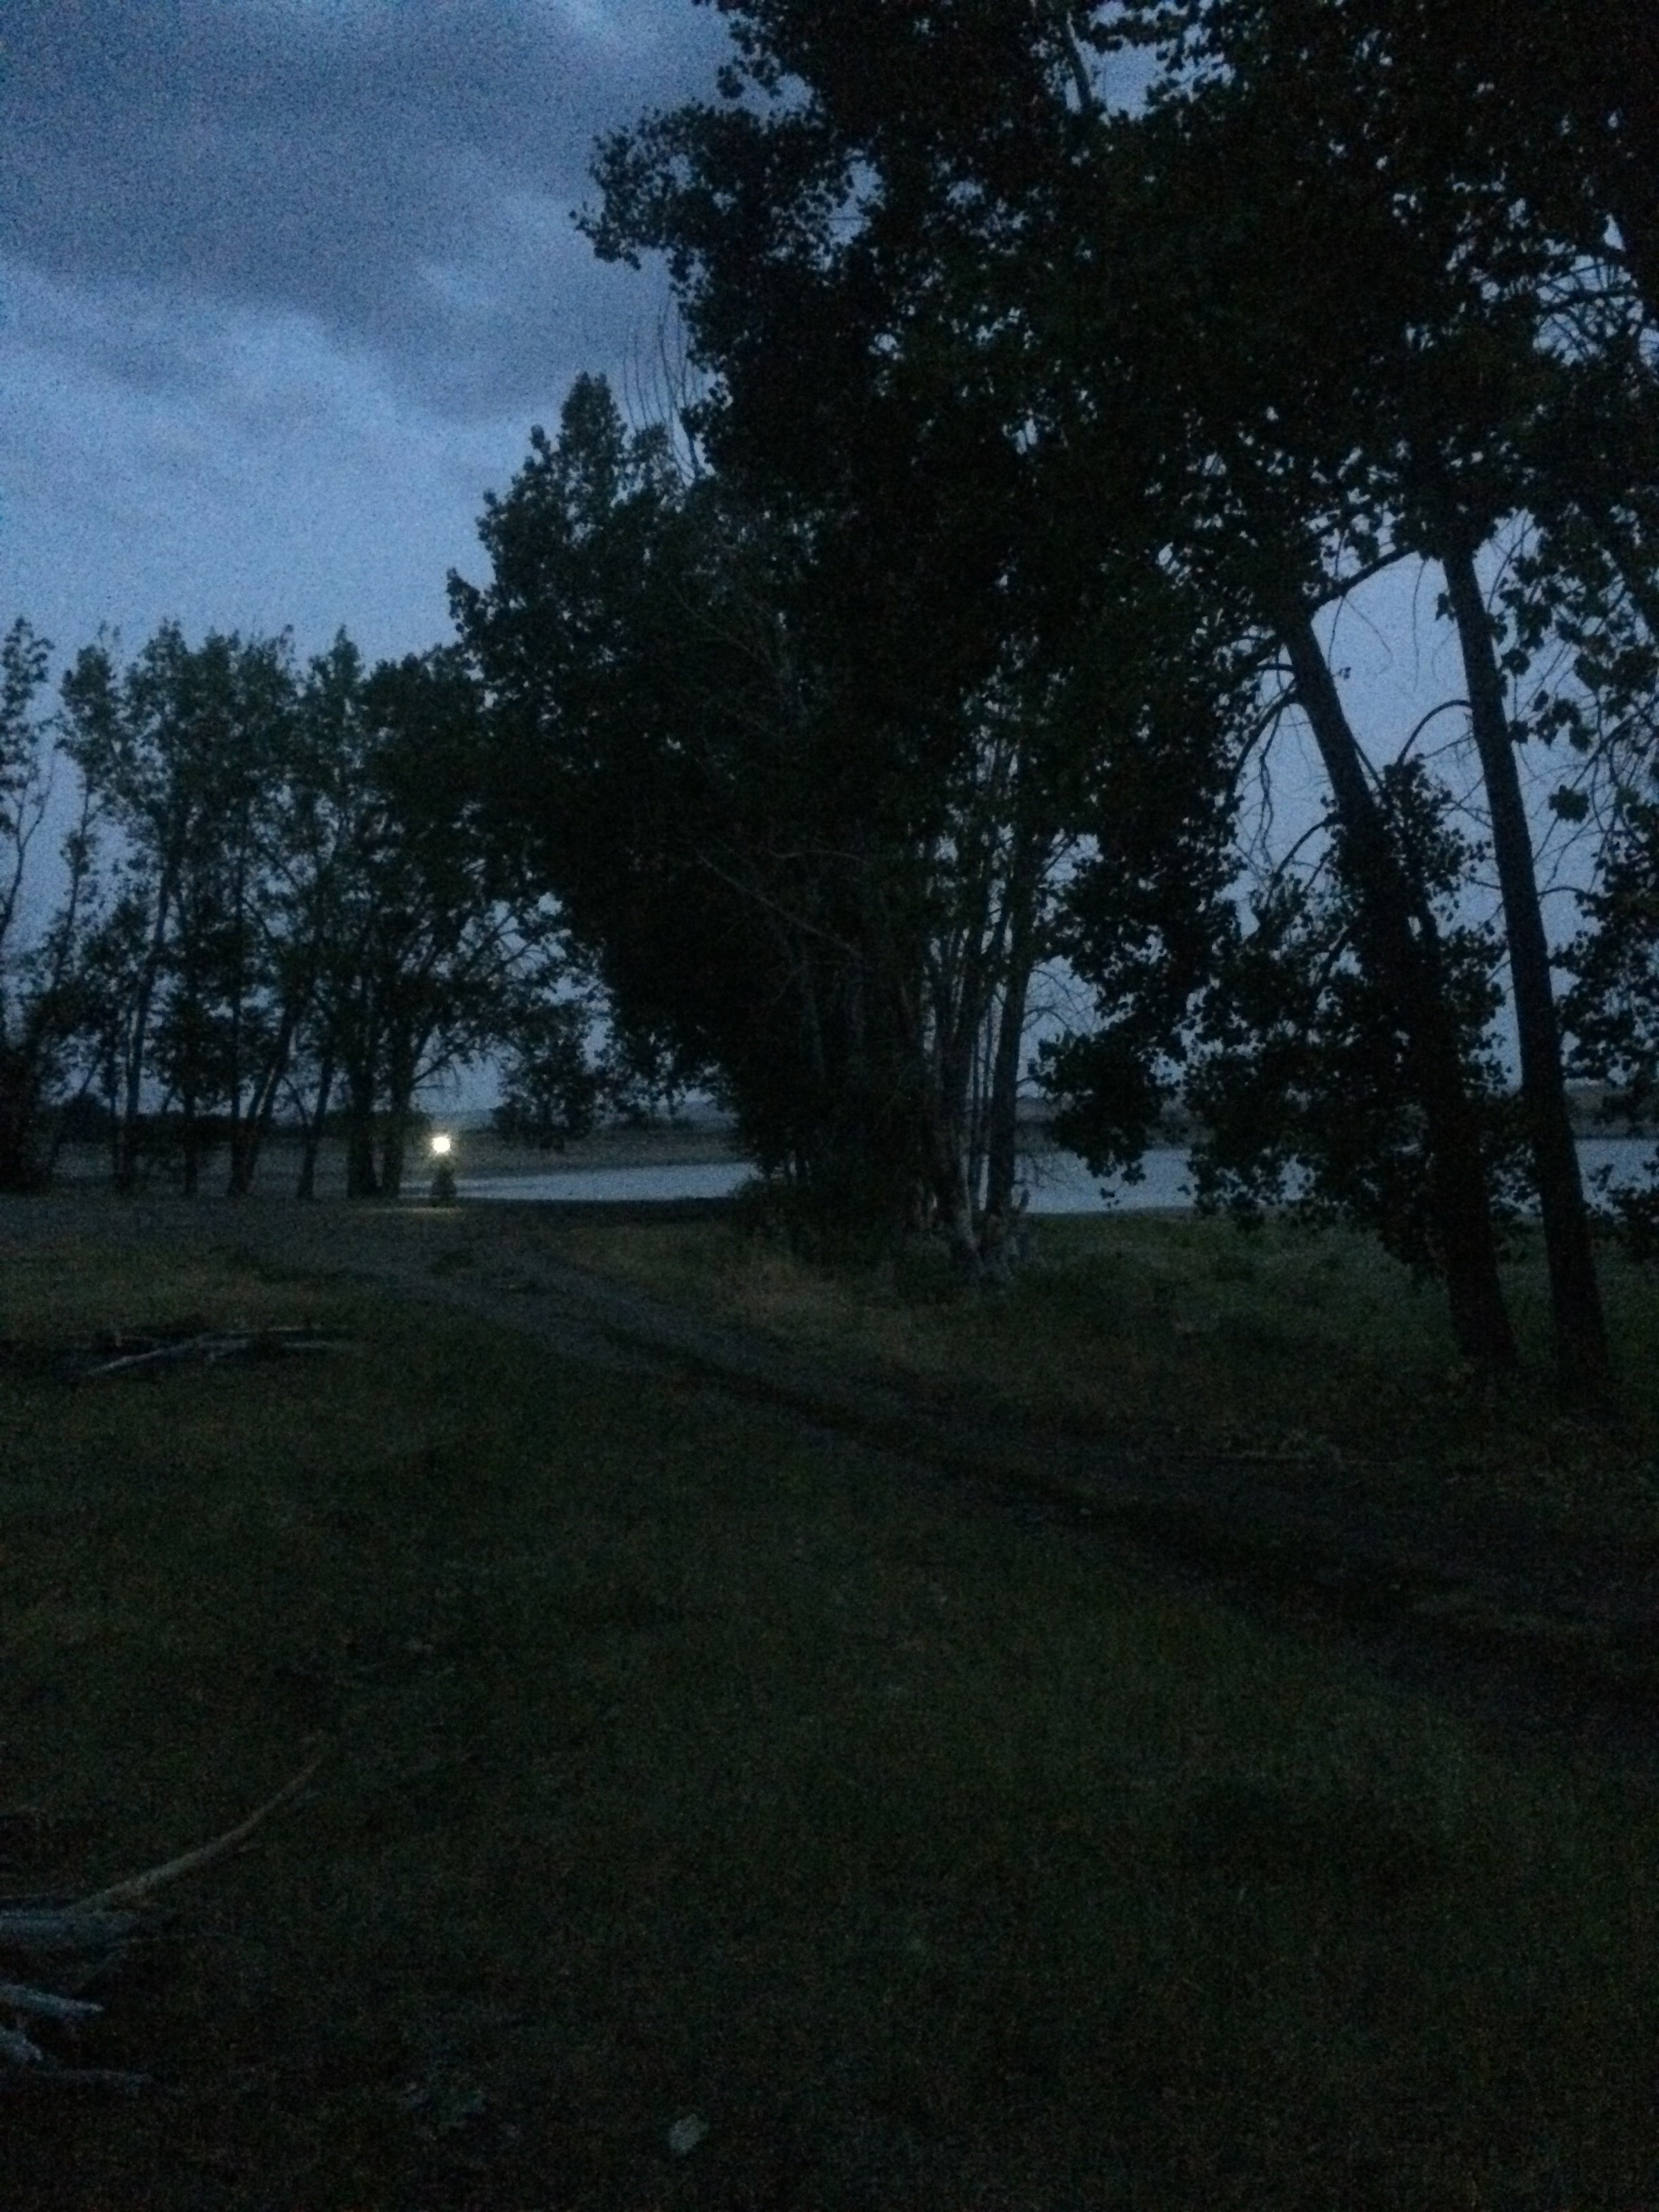 night biking by the lake.  this was taken looking southeast from the campsite area.